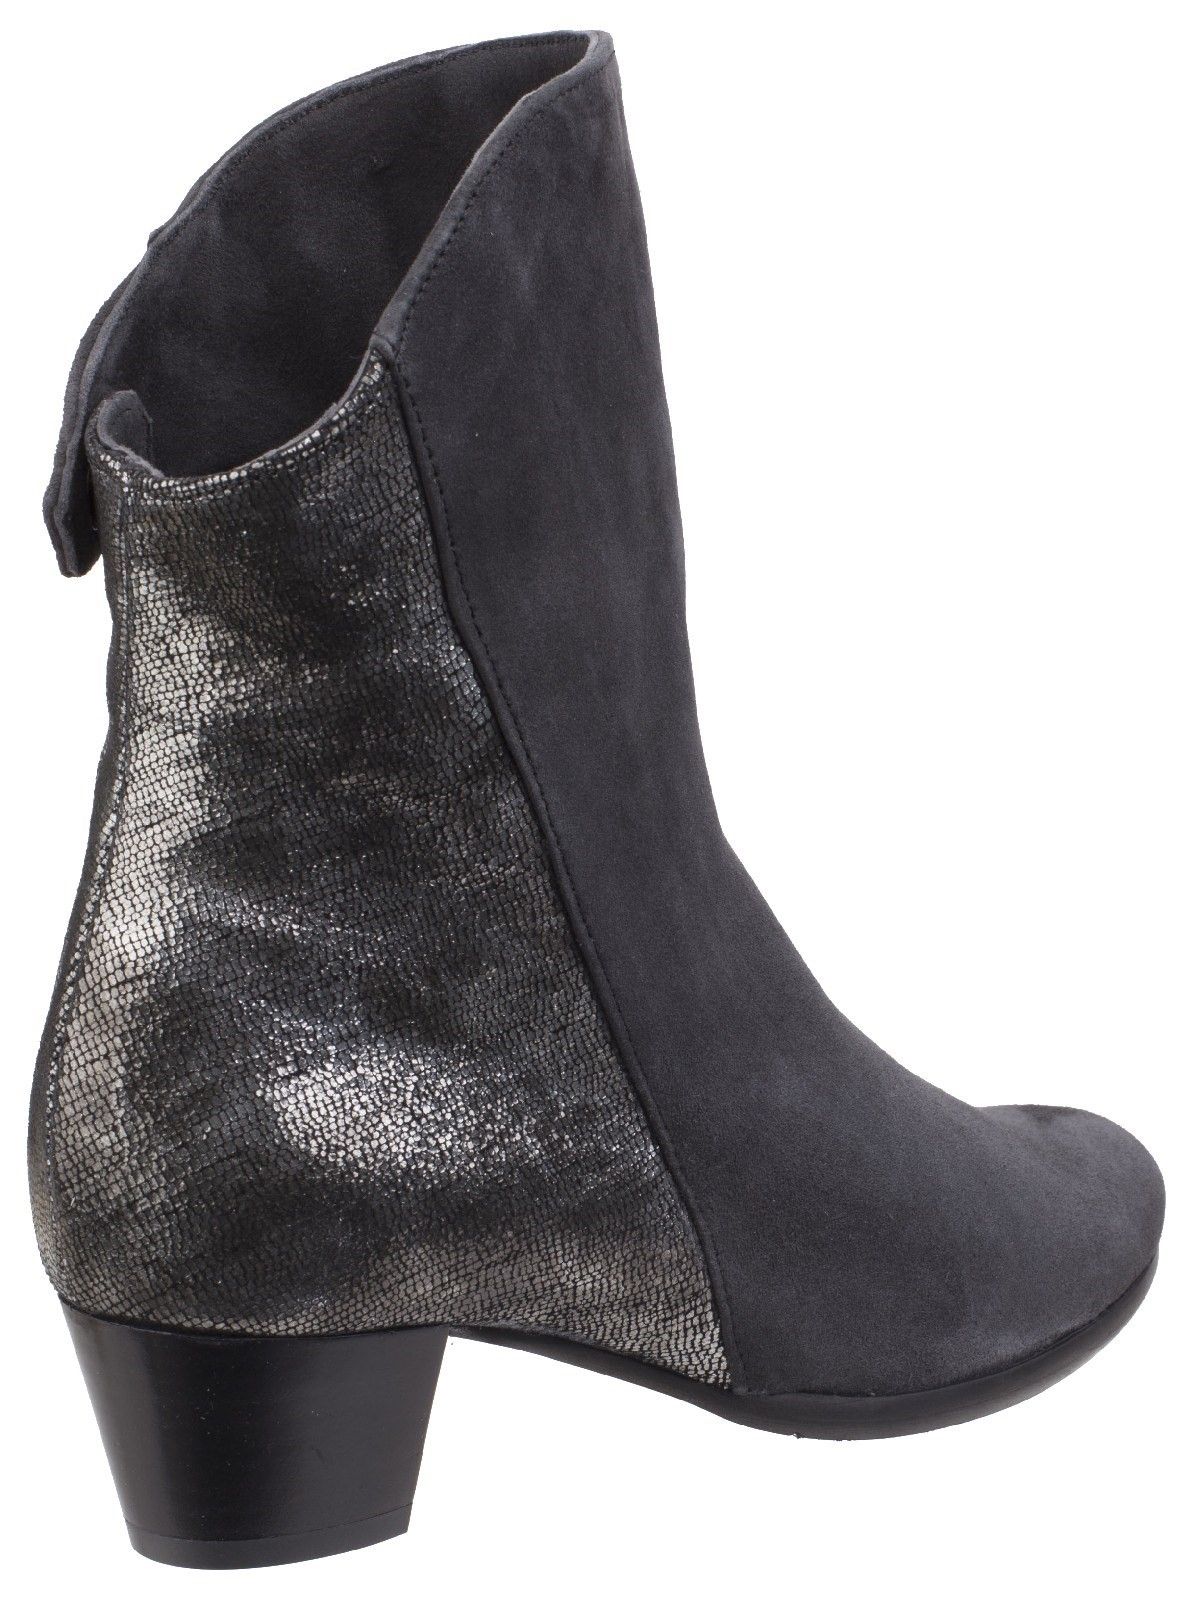 Riva brings in a twist with this eye-catching evening boot.  A half shimmering metallic reptile print gives an elegant edge to a traditional classic suede boot. Crafted with a luxury leather upper. 
Flexible and soft supple suede vamp. 
Shimmering metallic reptile print back and cuff lip. 
Versatile styling with optional fold over cuff and snap button fastening. 
Full side zip opening.